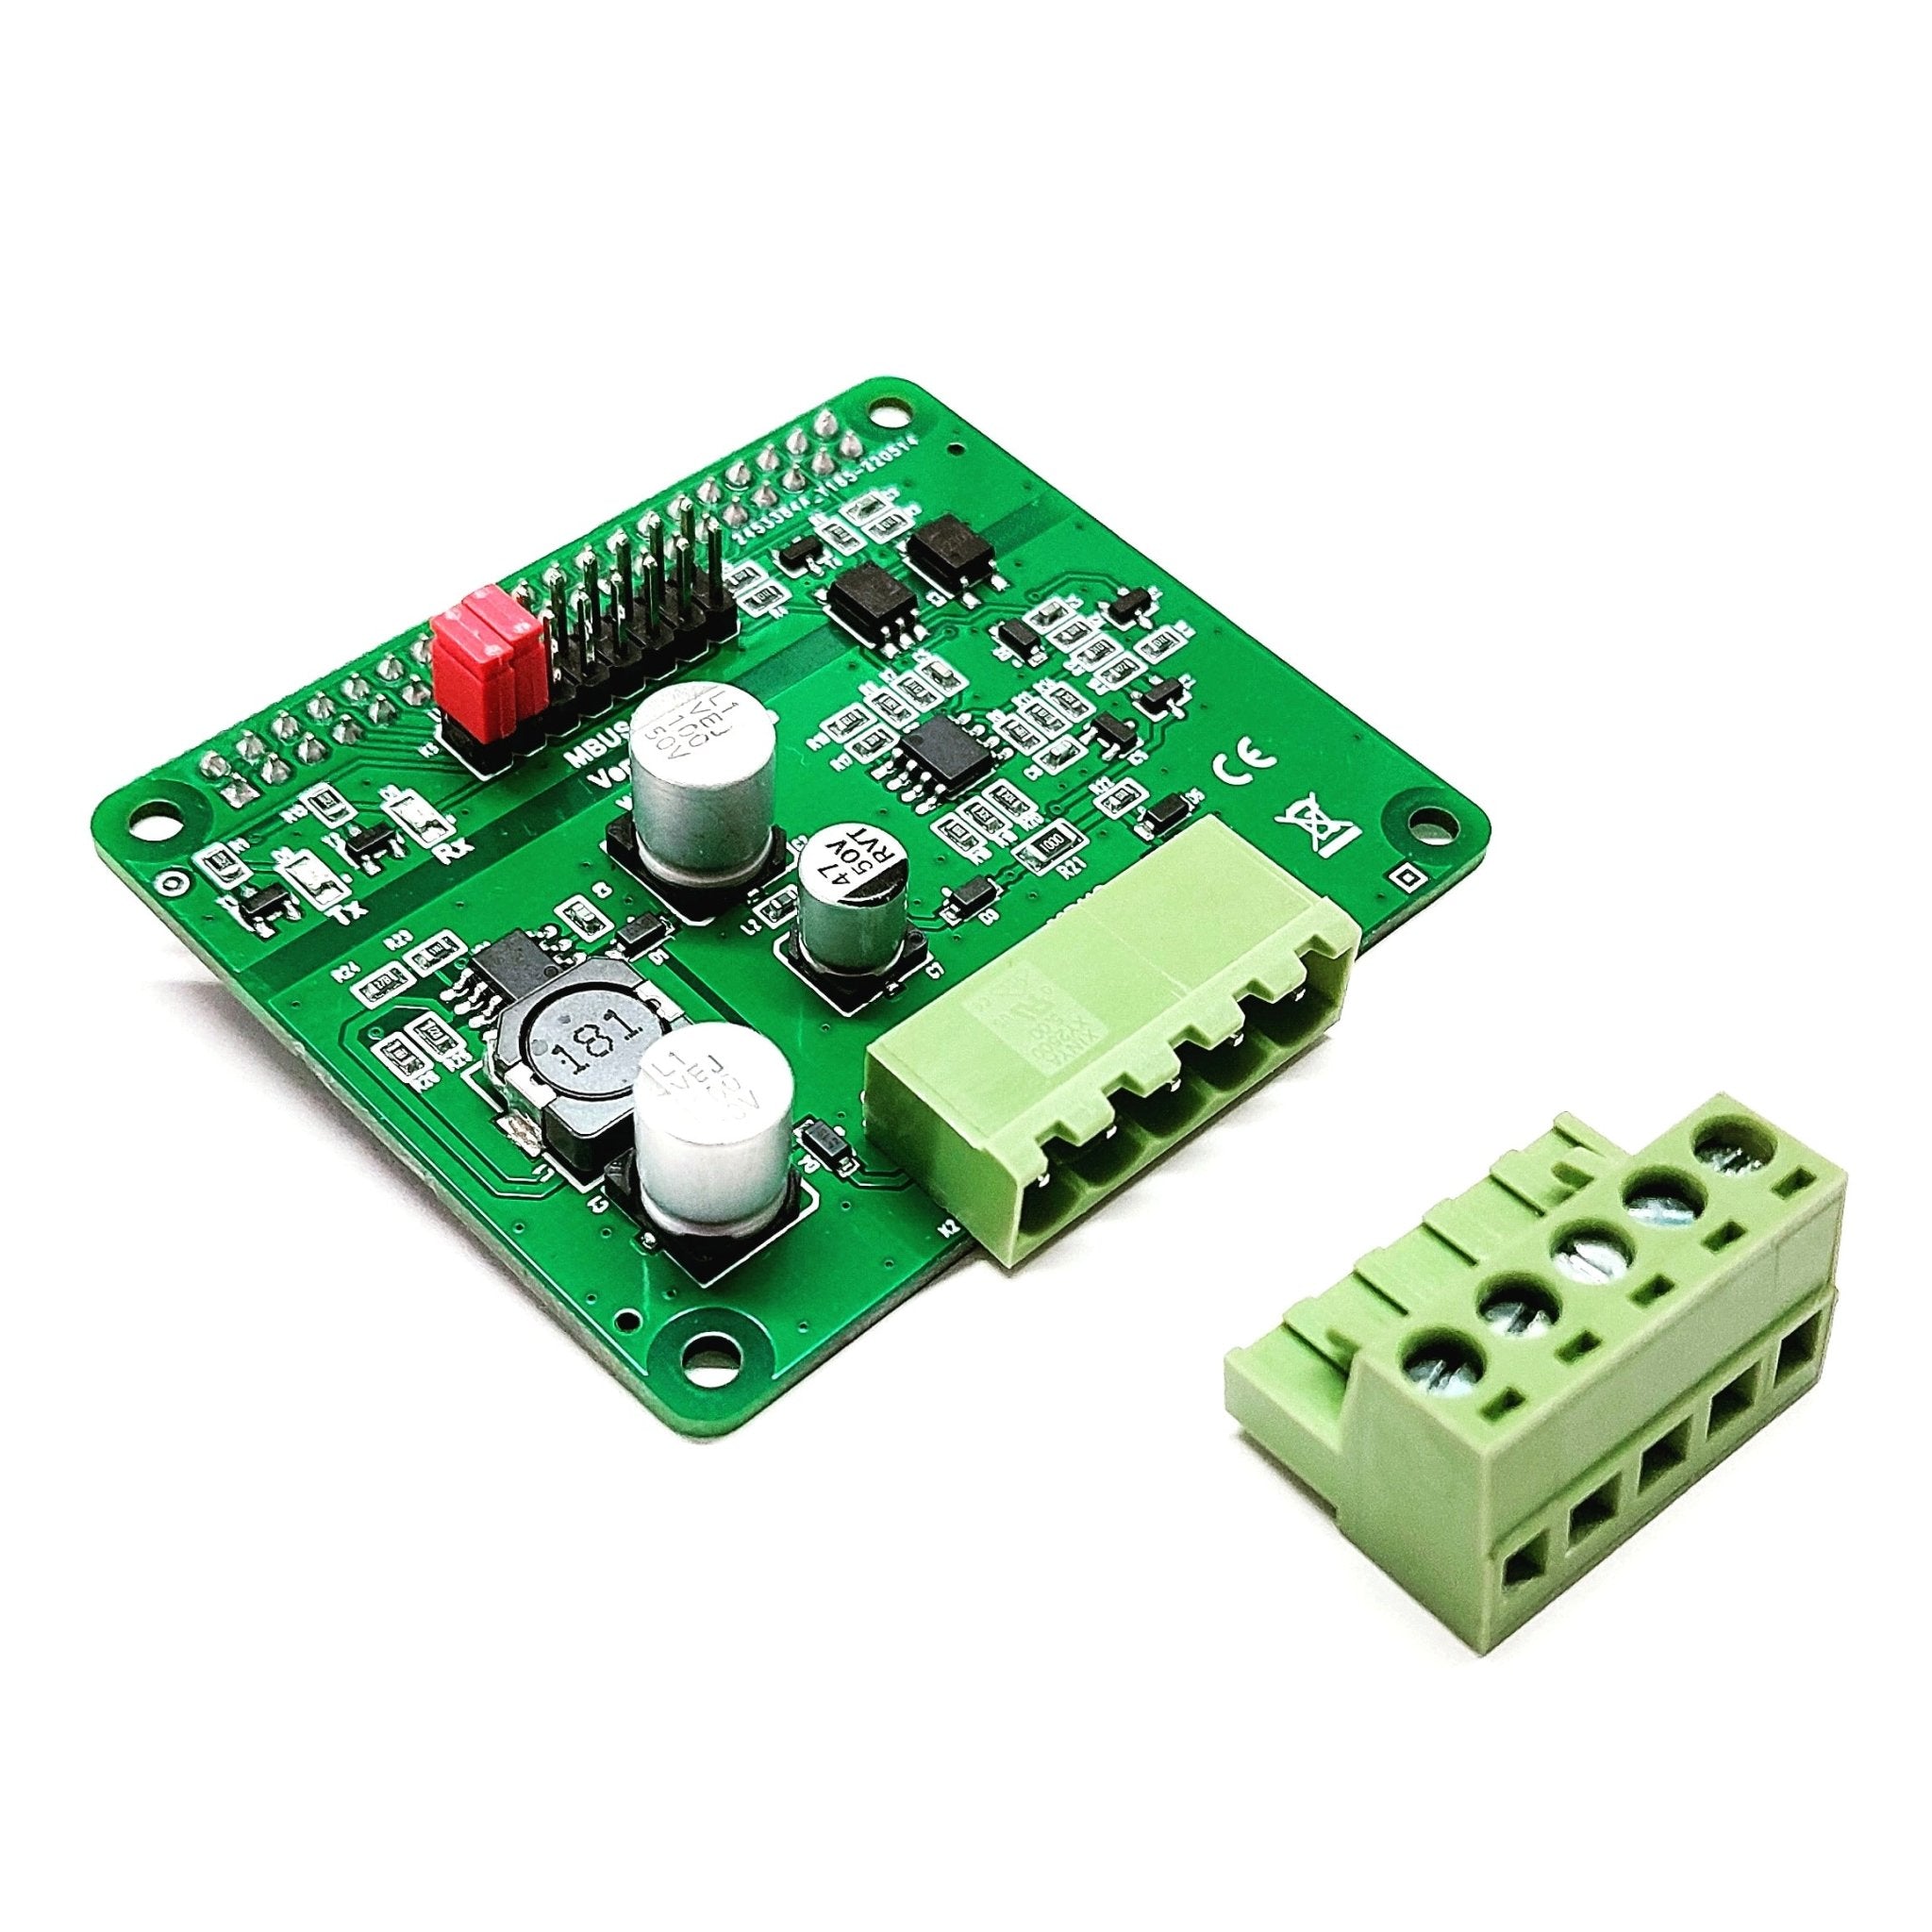 220V to 12V mini power supply compatible with Arduino and Raspberry Pi